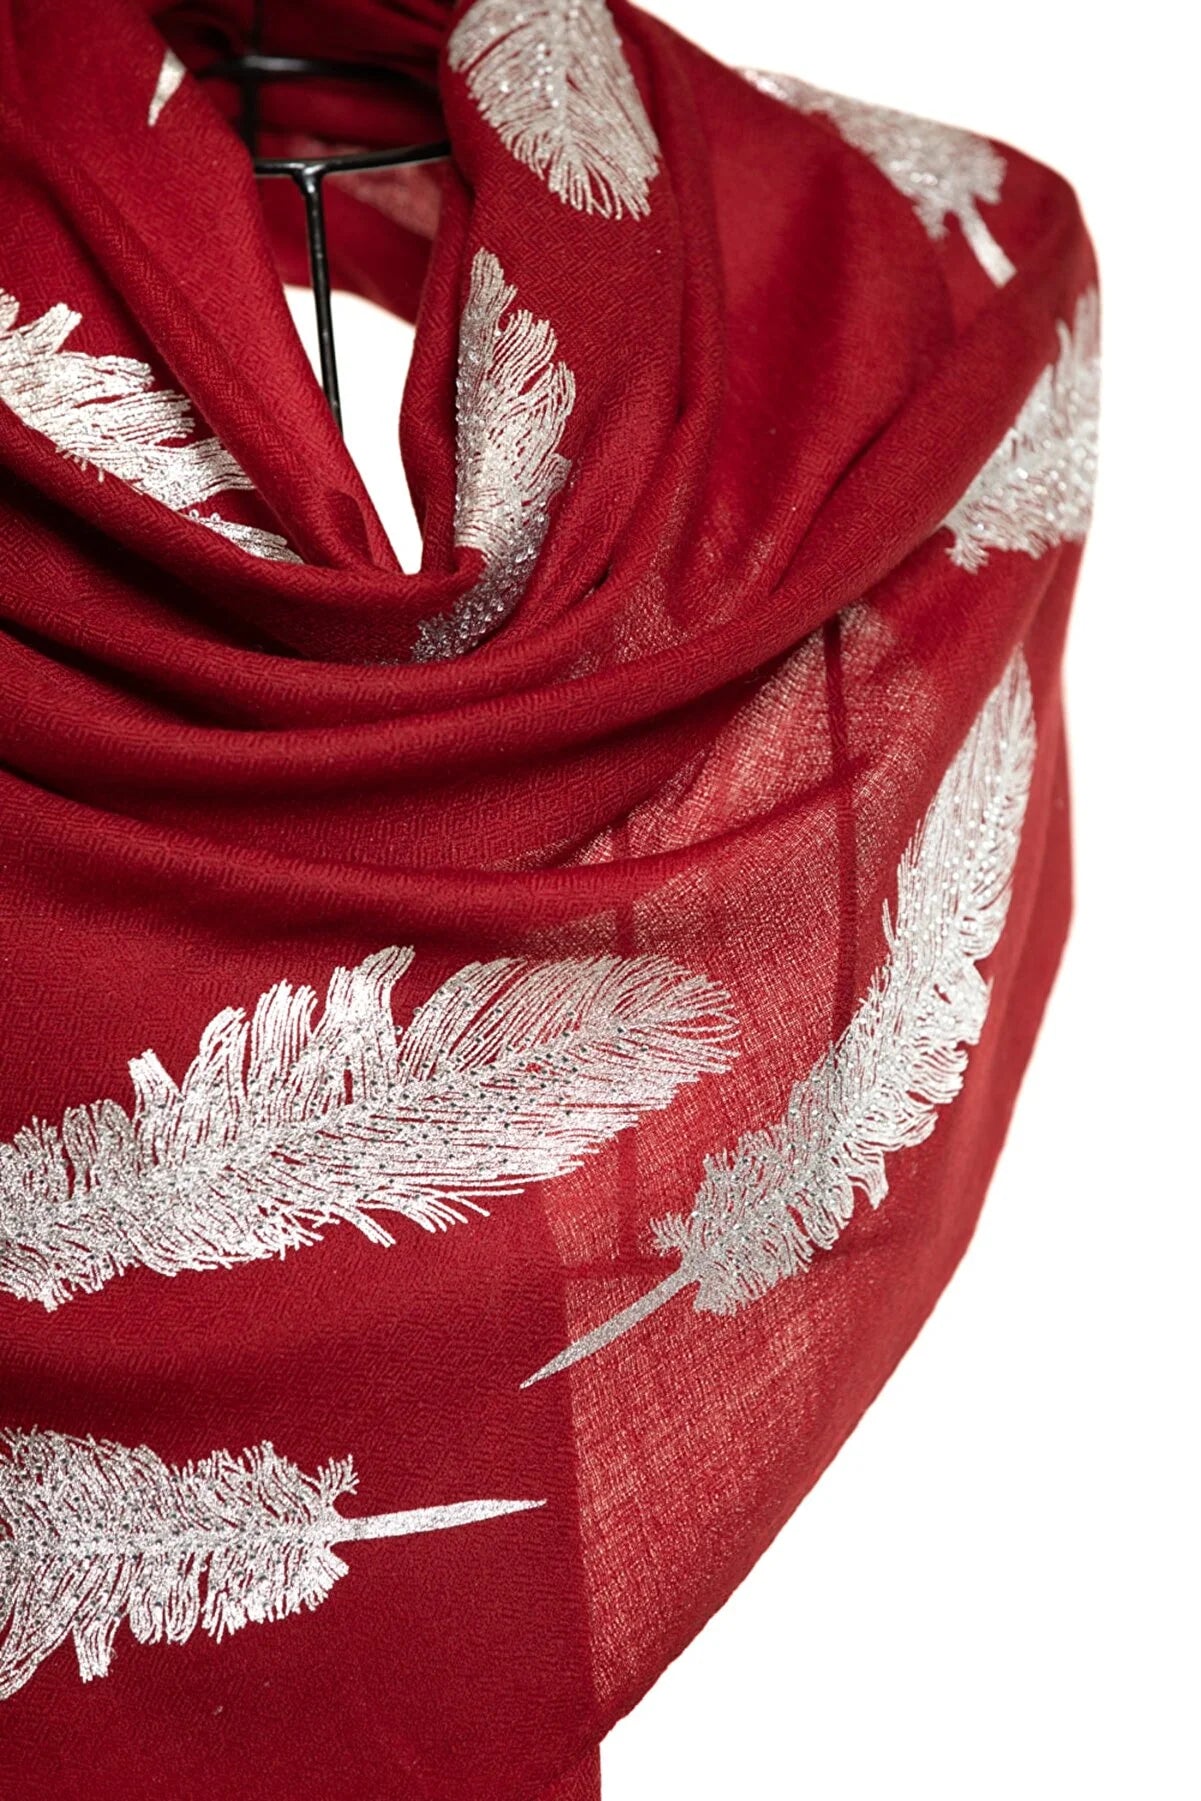 Angel Feathers Crystal Feathers Shawl Stole - Burgundy Silver